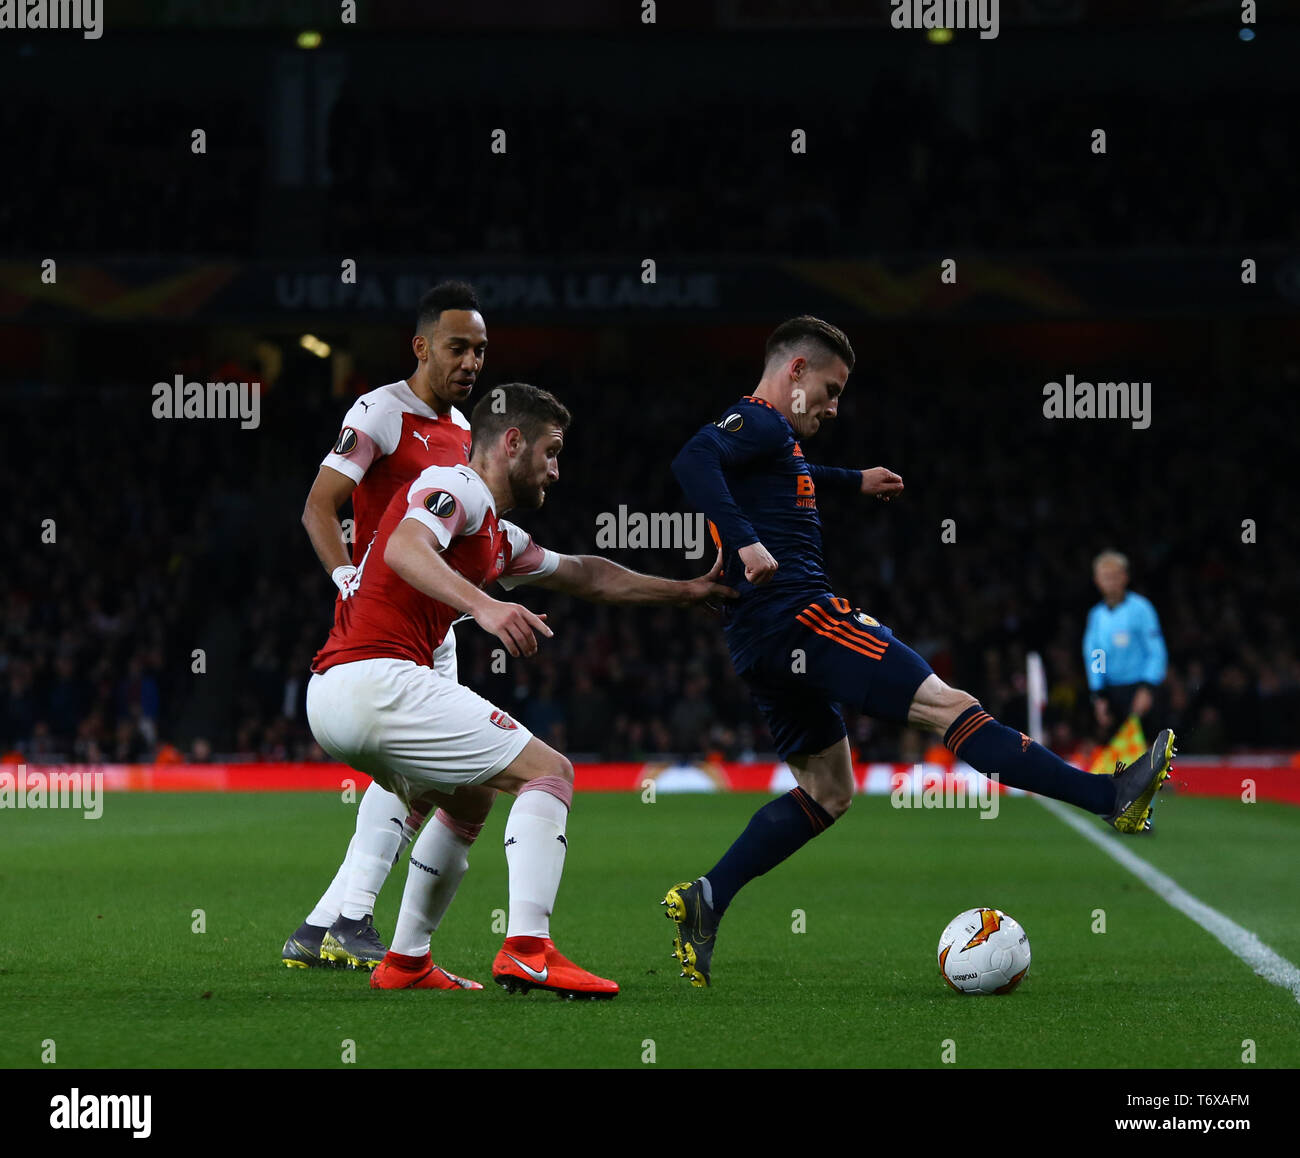 London, UK. 02nd May, 2019. Pierre-Emerick Aubameyang and Shkodran Mustafi of Arsenal defend during the Europa League semi final leg one match between Arsenal and Atletico Madrid at The Emirates Stadium on May 2, 2019 in London, United Kingdom. Credit: Mitchell Gunn/ESPA-Images Credit: Cal Sport Media/Alamy Live News Stock Photo